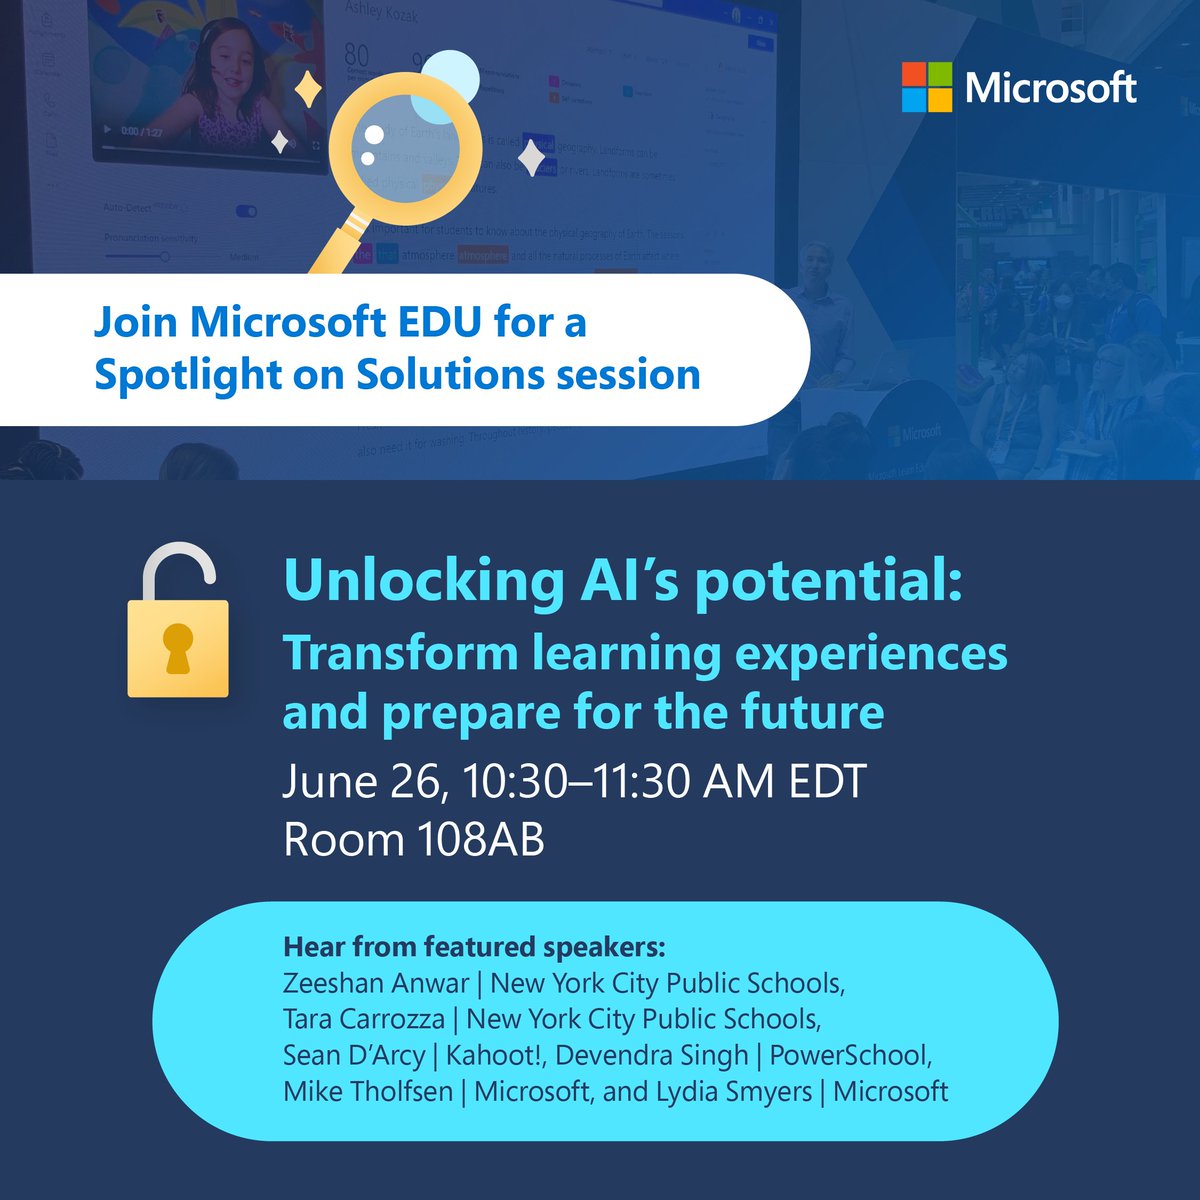 Don’t miss out on this highly anticipated session at #ISTELive 23!

Join speakers from @NYCSchools, #MicrosoftEDU, and more to hear how #AI can transform learning for students and educators. Save it to your agenda: msft.it/6018gUx7G